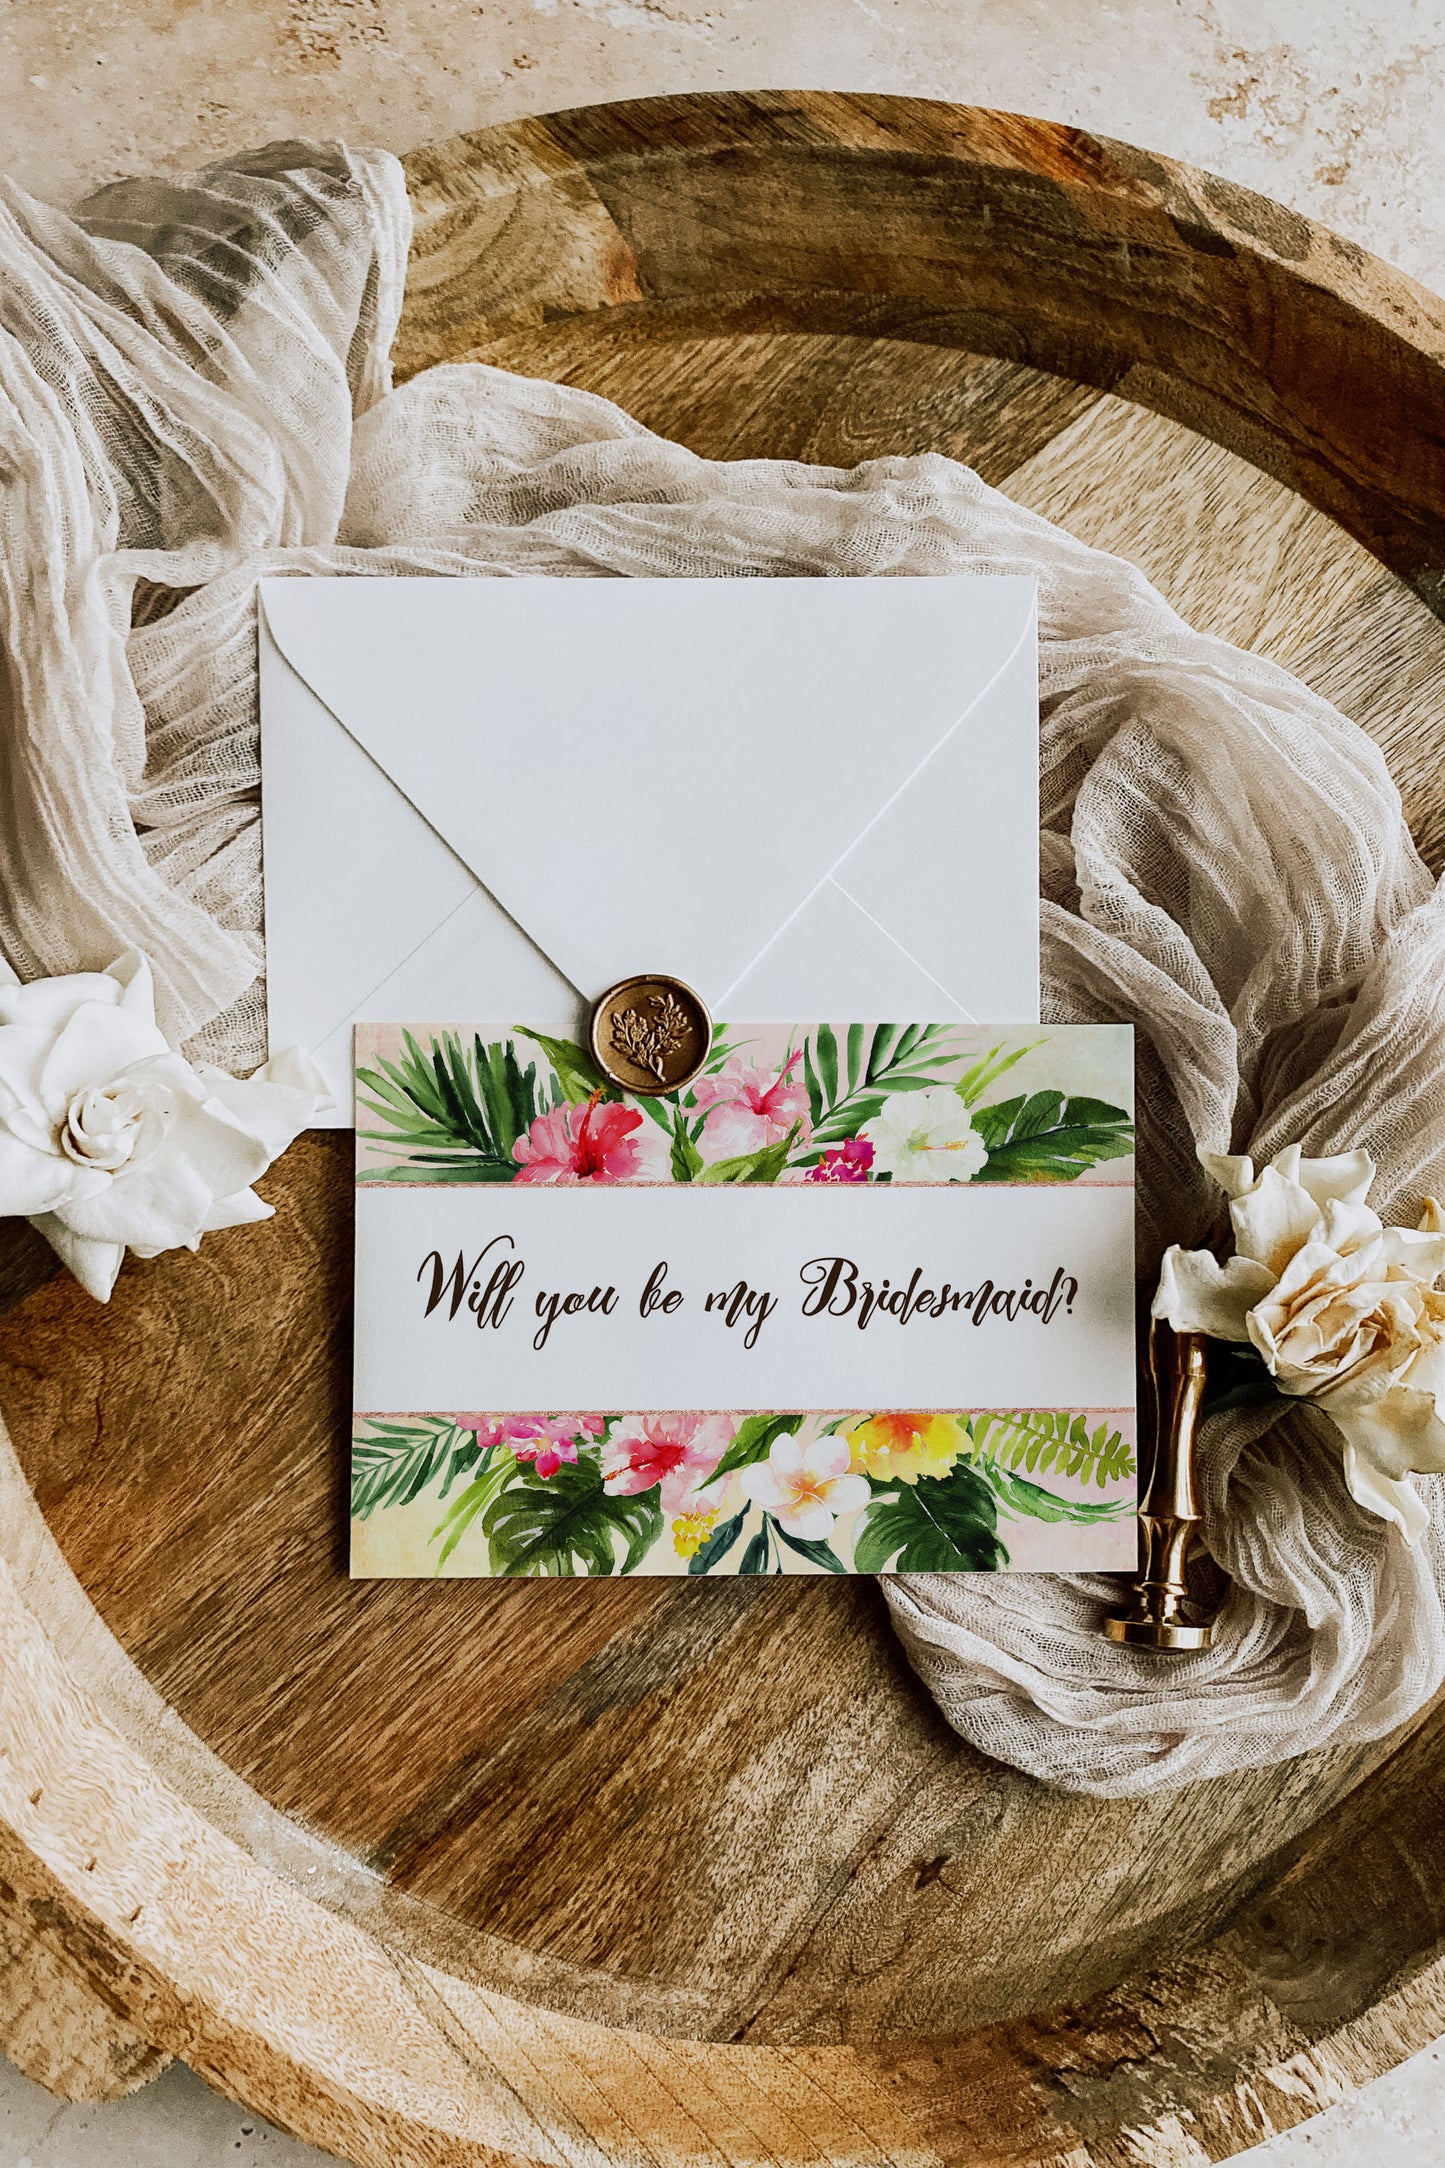 Tropical Floral Watercolor Beach Destination "Will you be my Bridesmaid" Digital "Instant Download" Invitation 1 - 'TROPICAL LUSH"